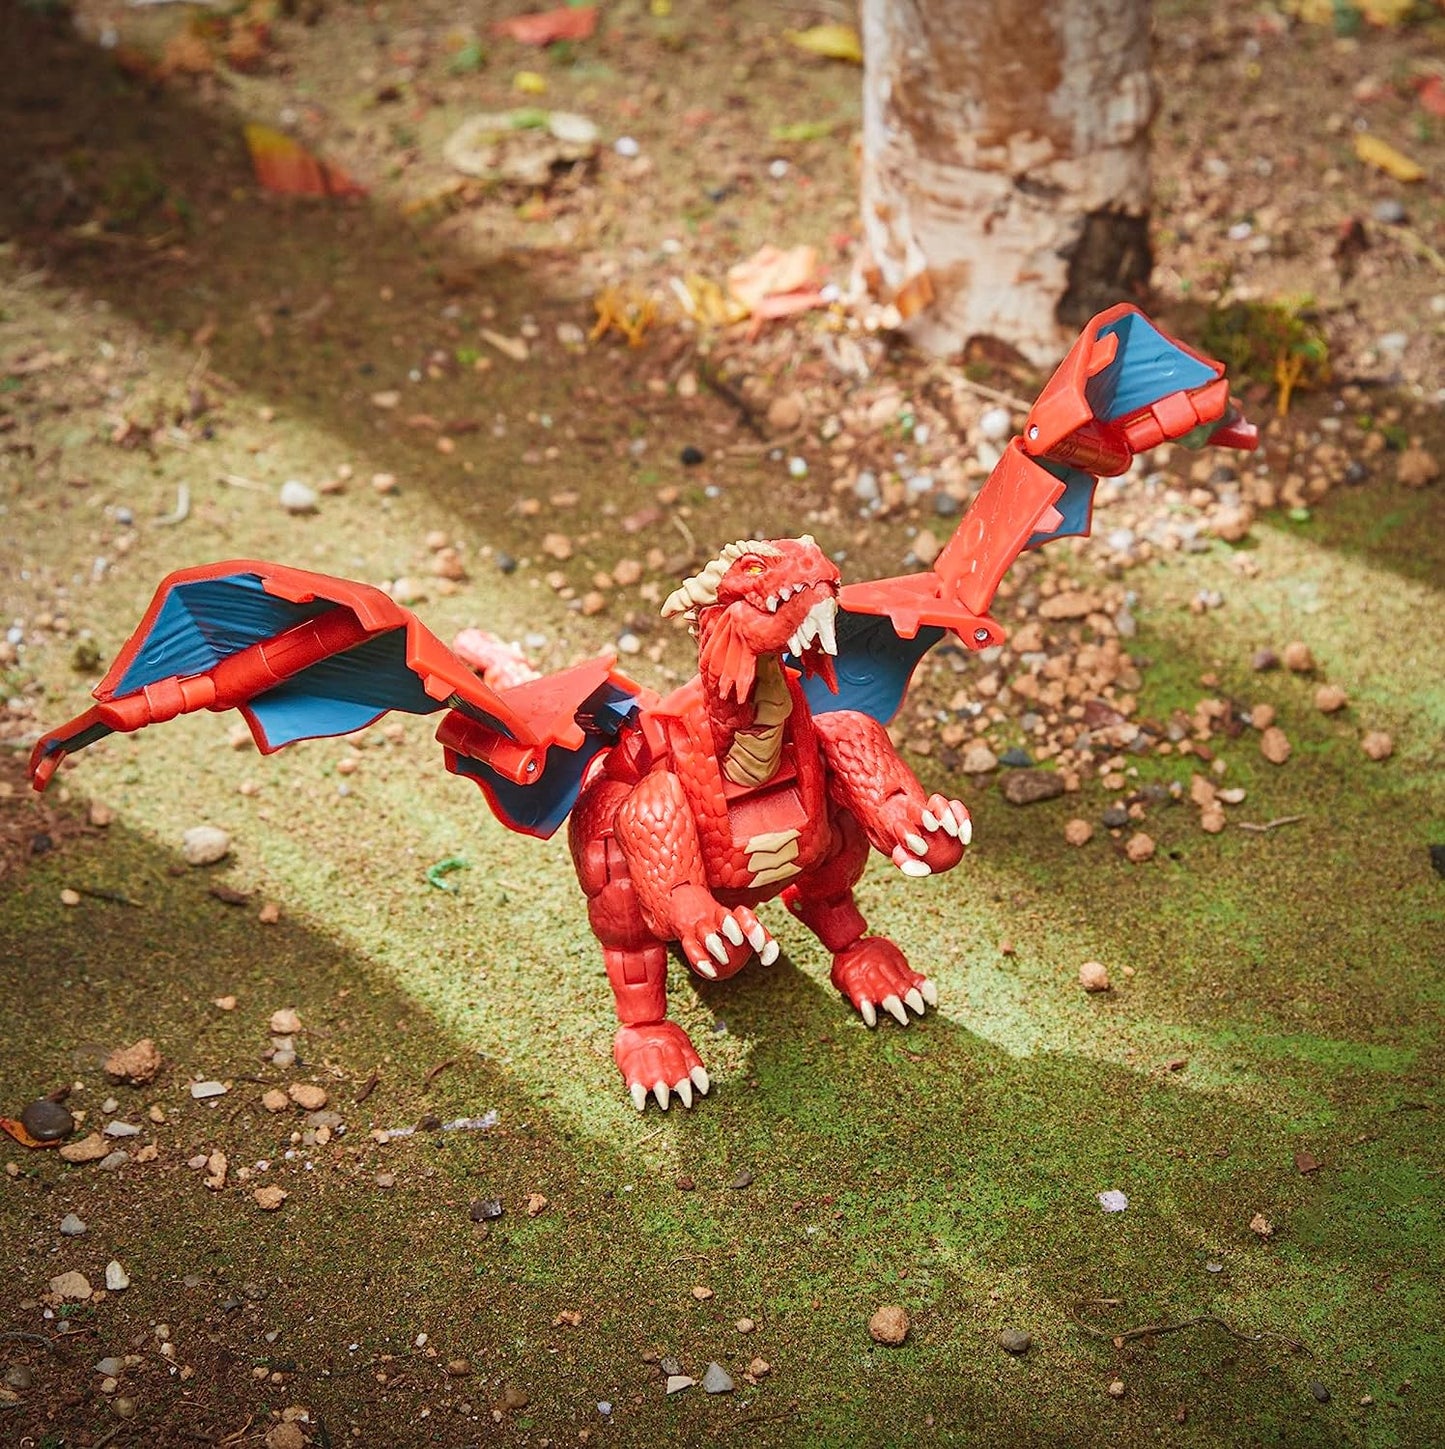 D&D COLLECTIBLE RED DRAGON